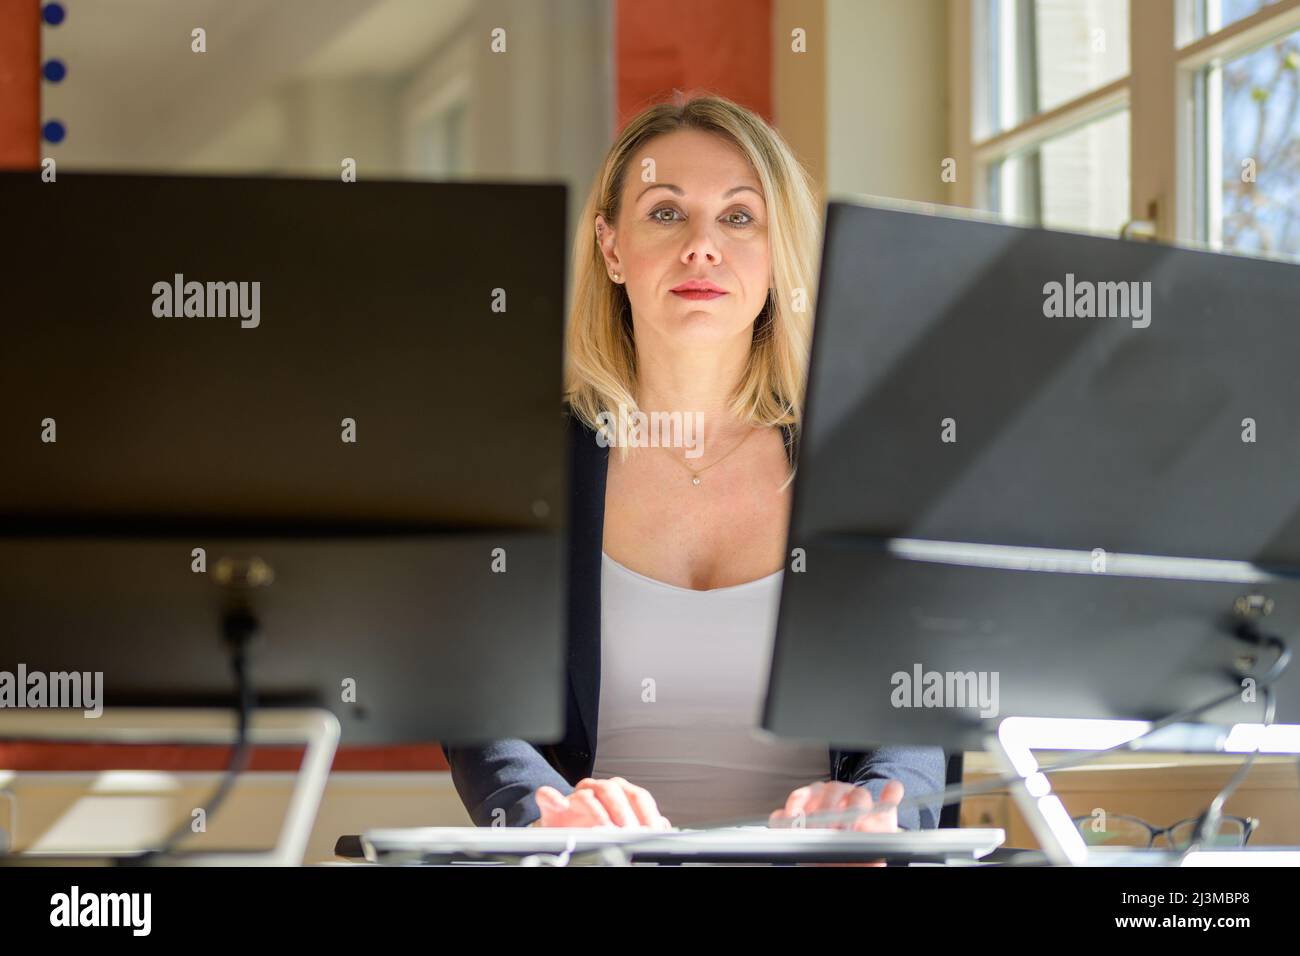 Confident businesswoman or manageress looking at the camera with a thoughtful expression viewed between two computer monitors in an office Stock Photo